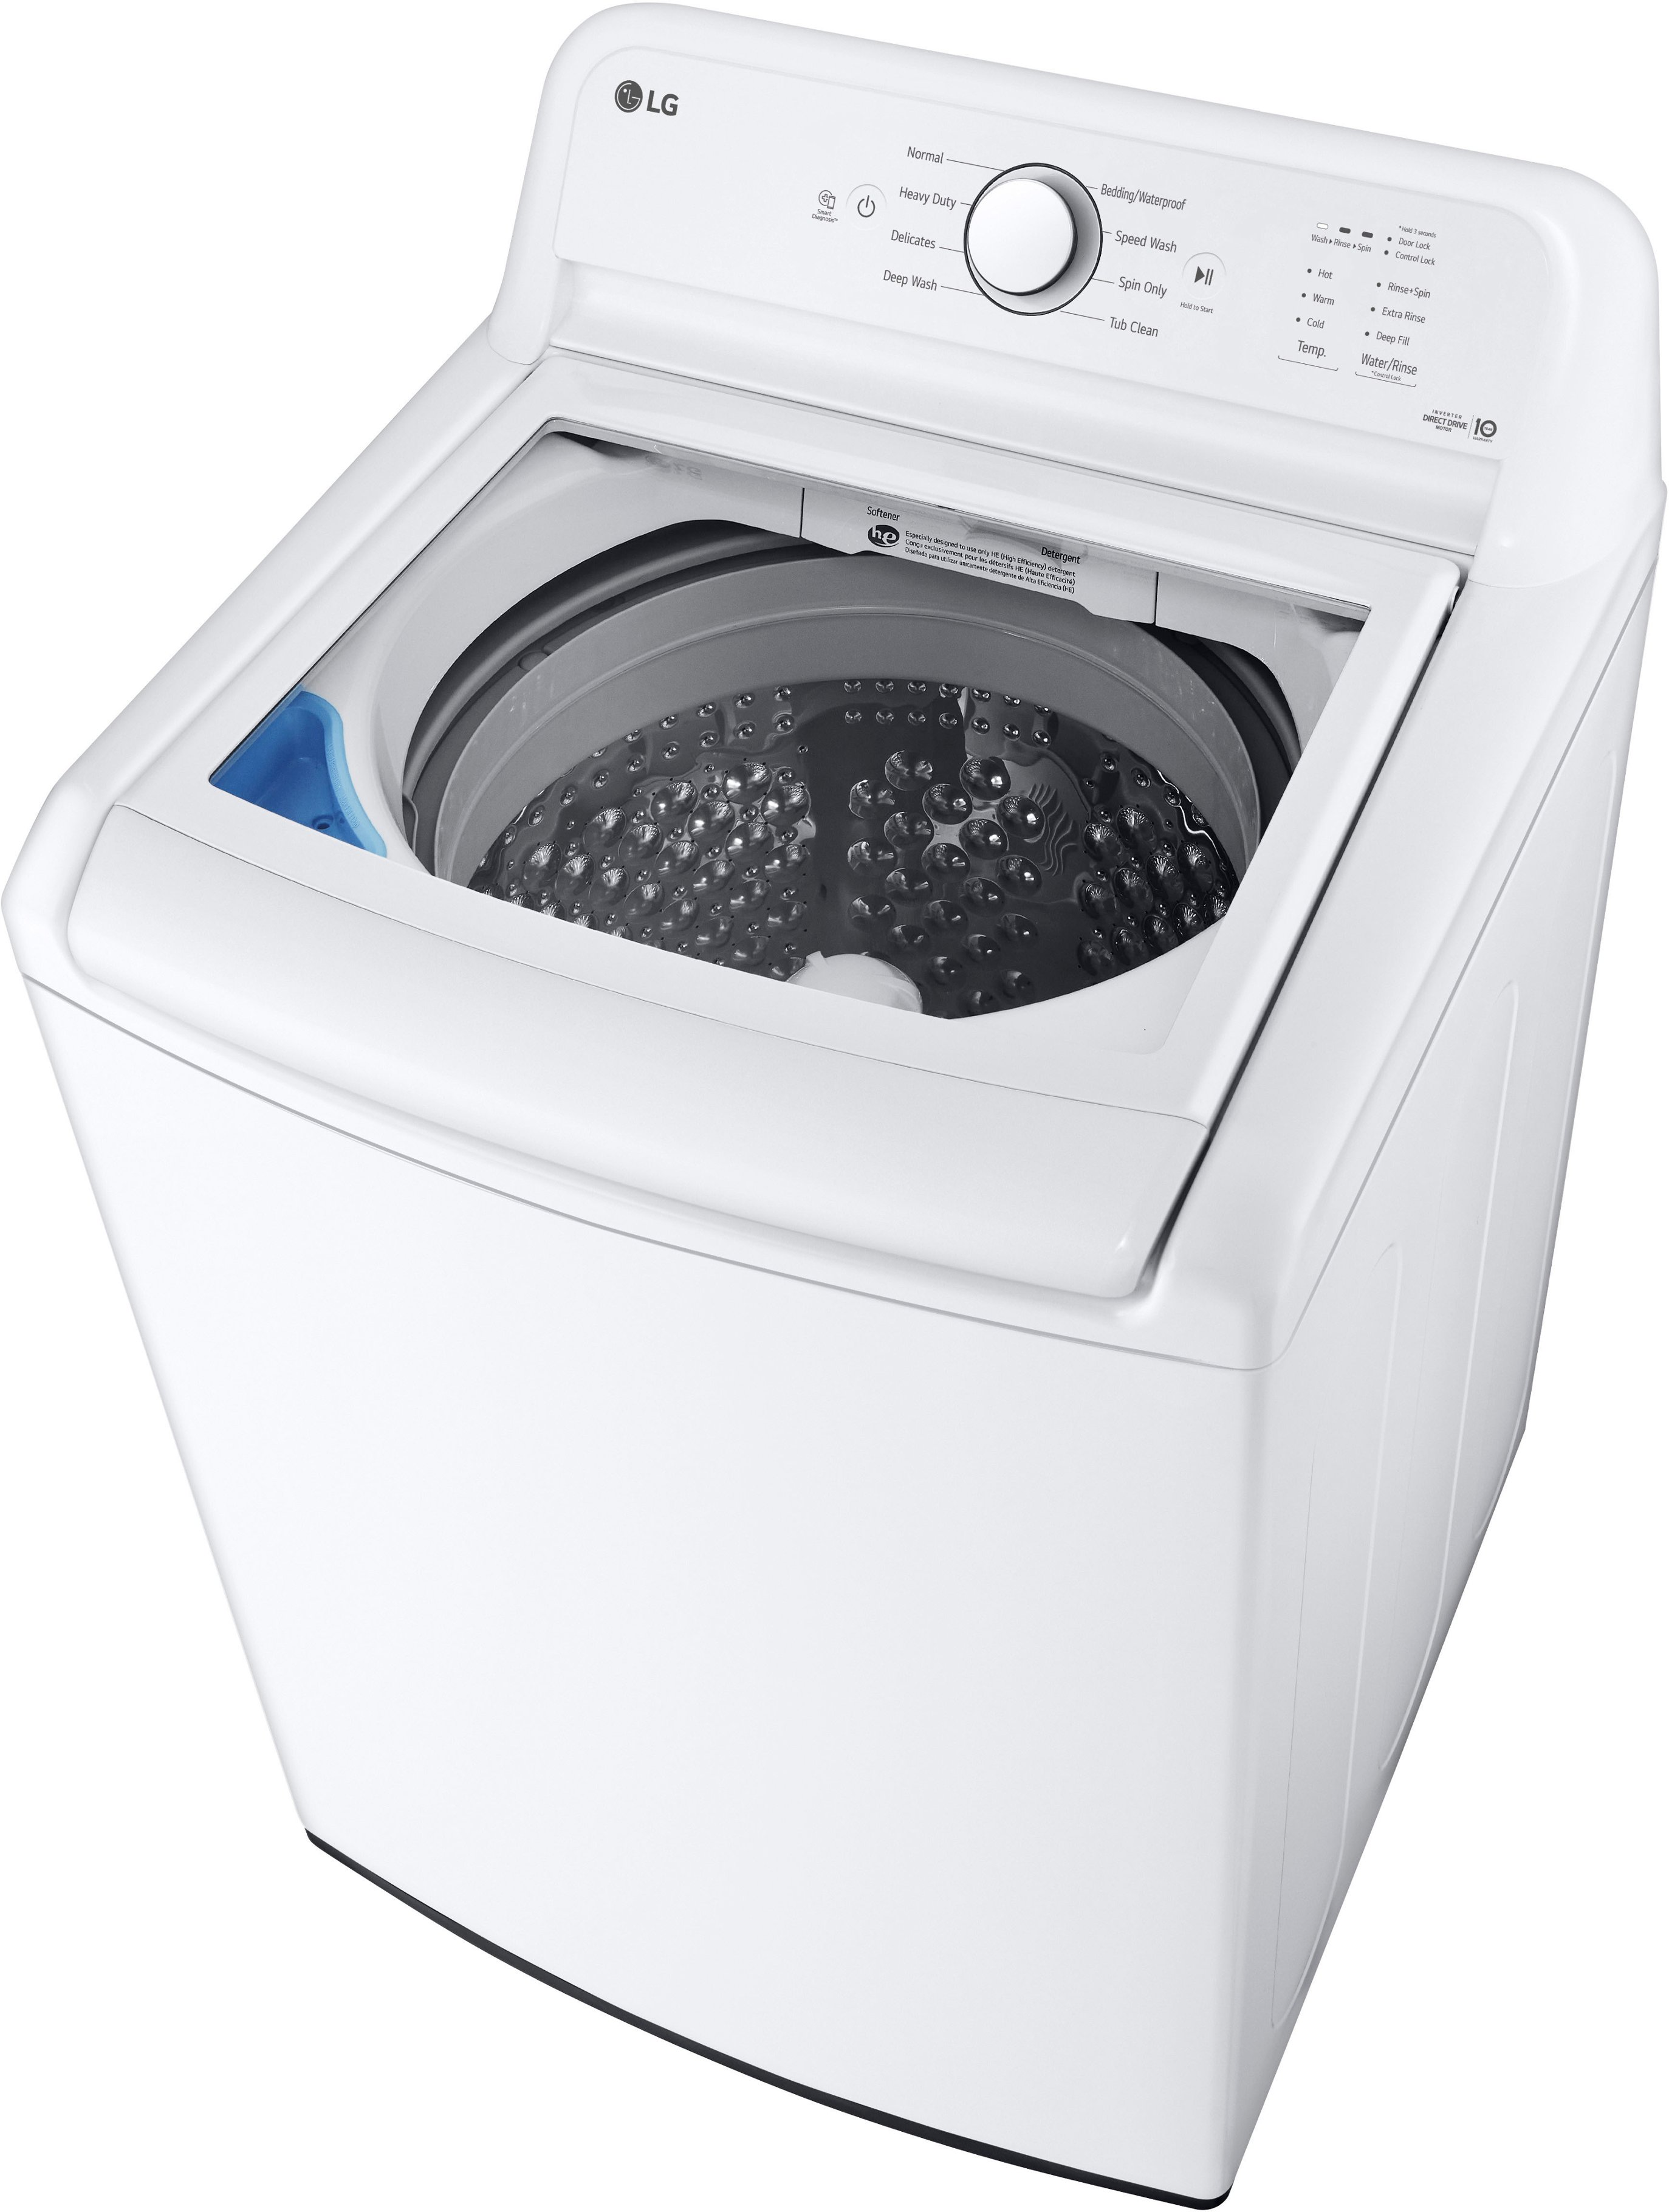 Glass Lid Ft. SlamProof Washer Best WT6105CW Top Load 4.1 - Cu. White Buy LG with